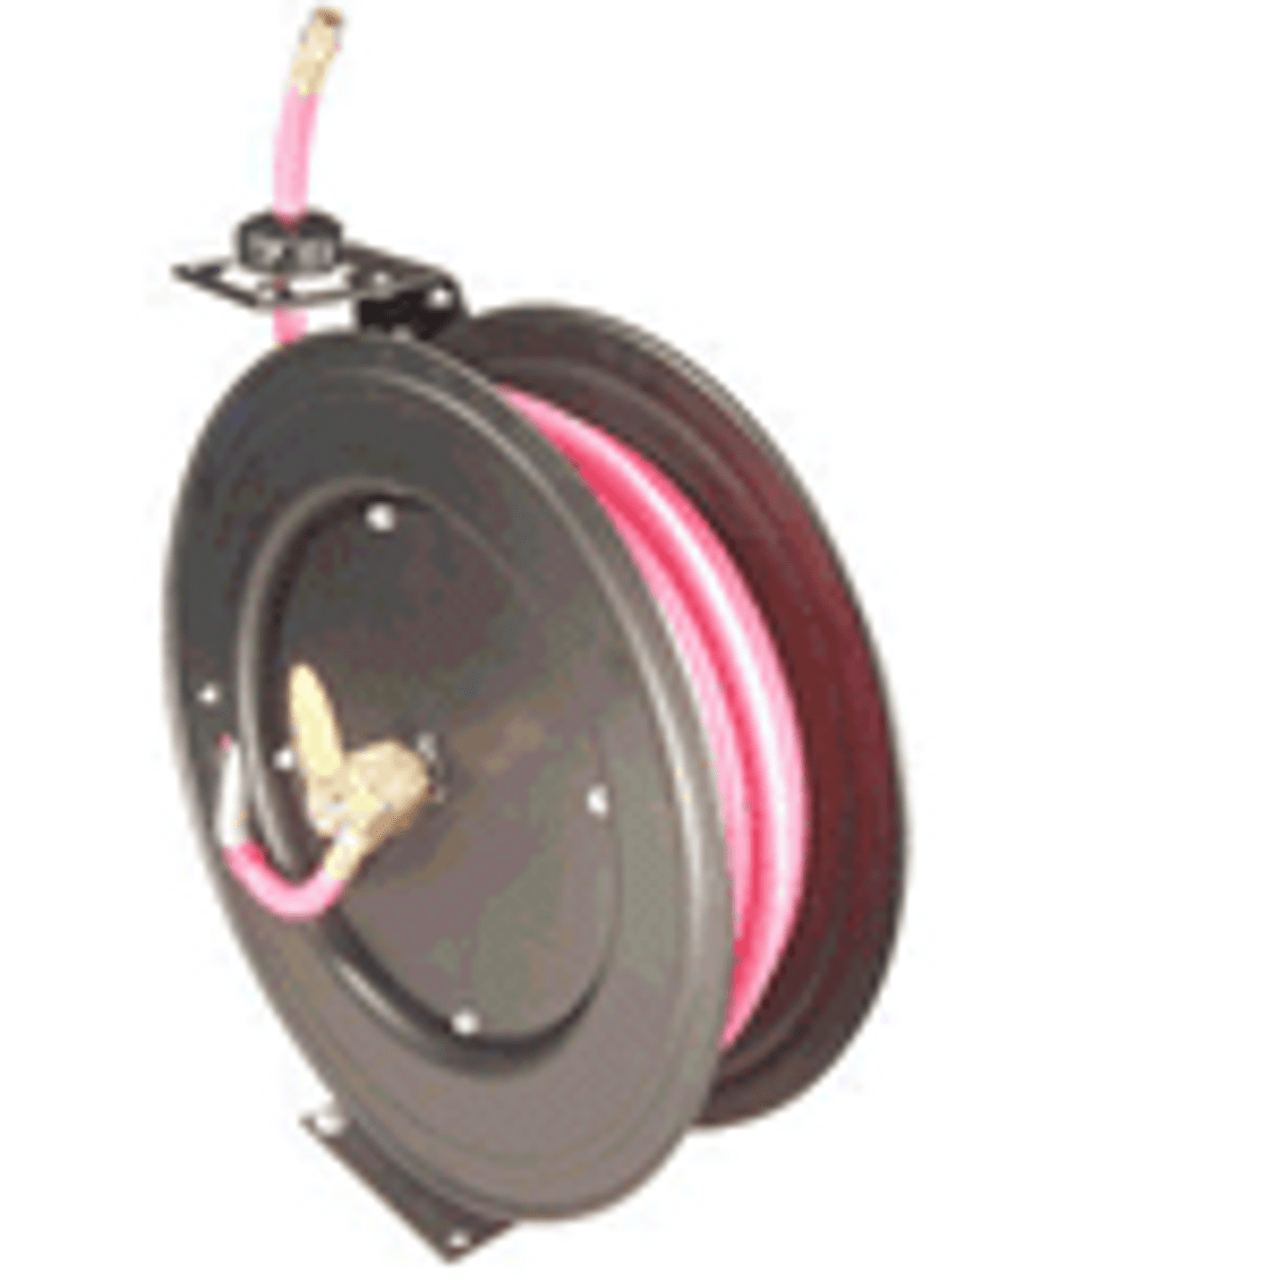 Astro Auto-Rewind Hose Reel With 3/8x50 Foot Non-Conductive Air Hose -  AP3688 - Light Tool Supply